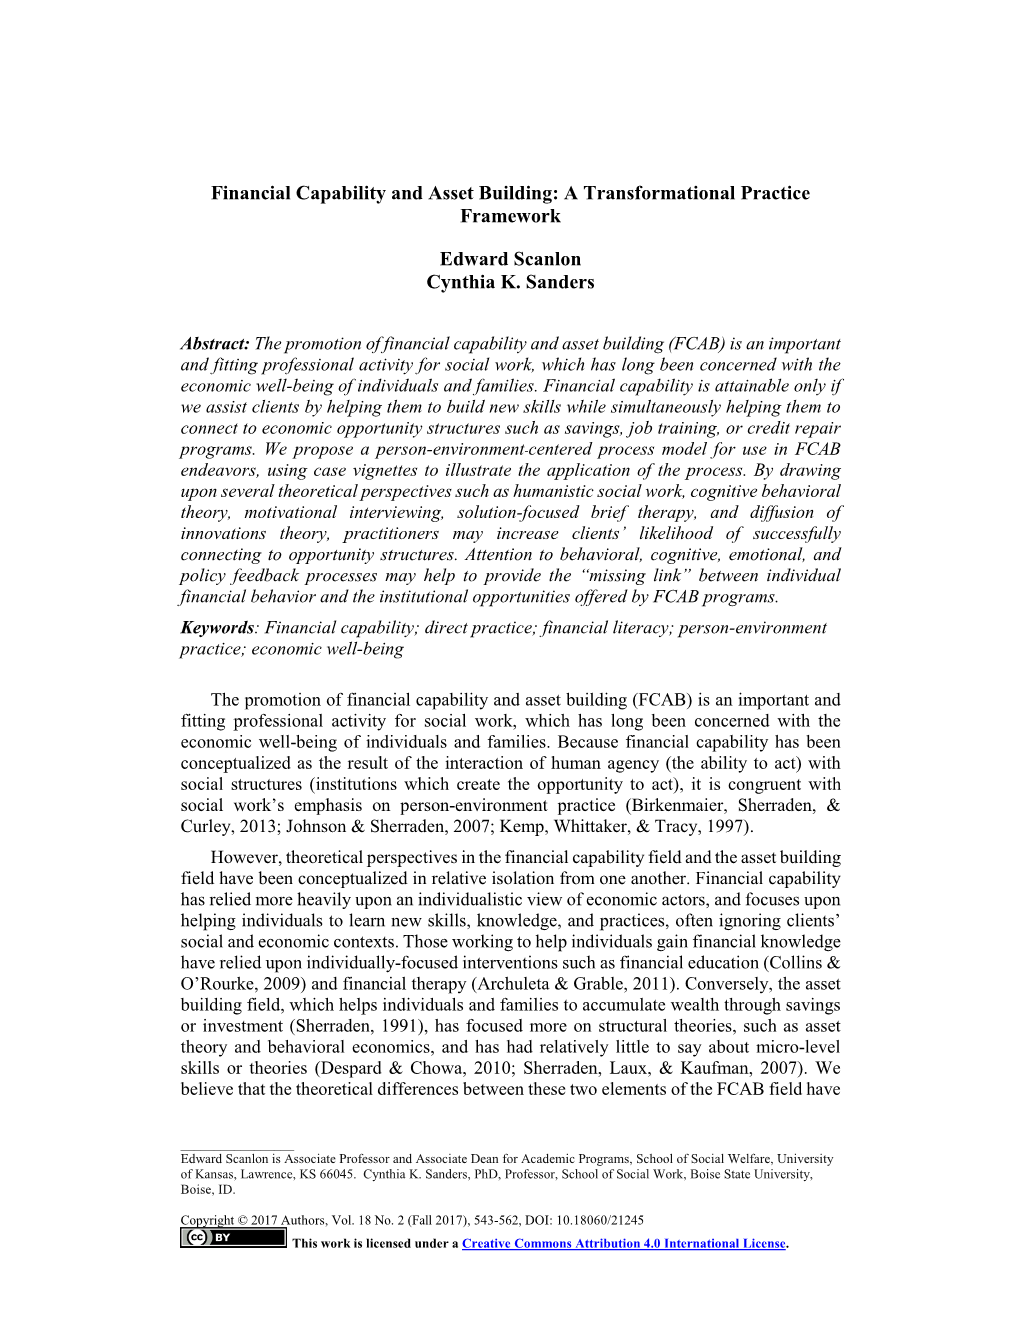 Financial Capability and Asset Building: a Transformational Practice Framework